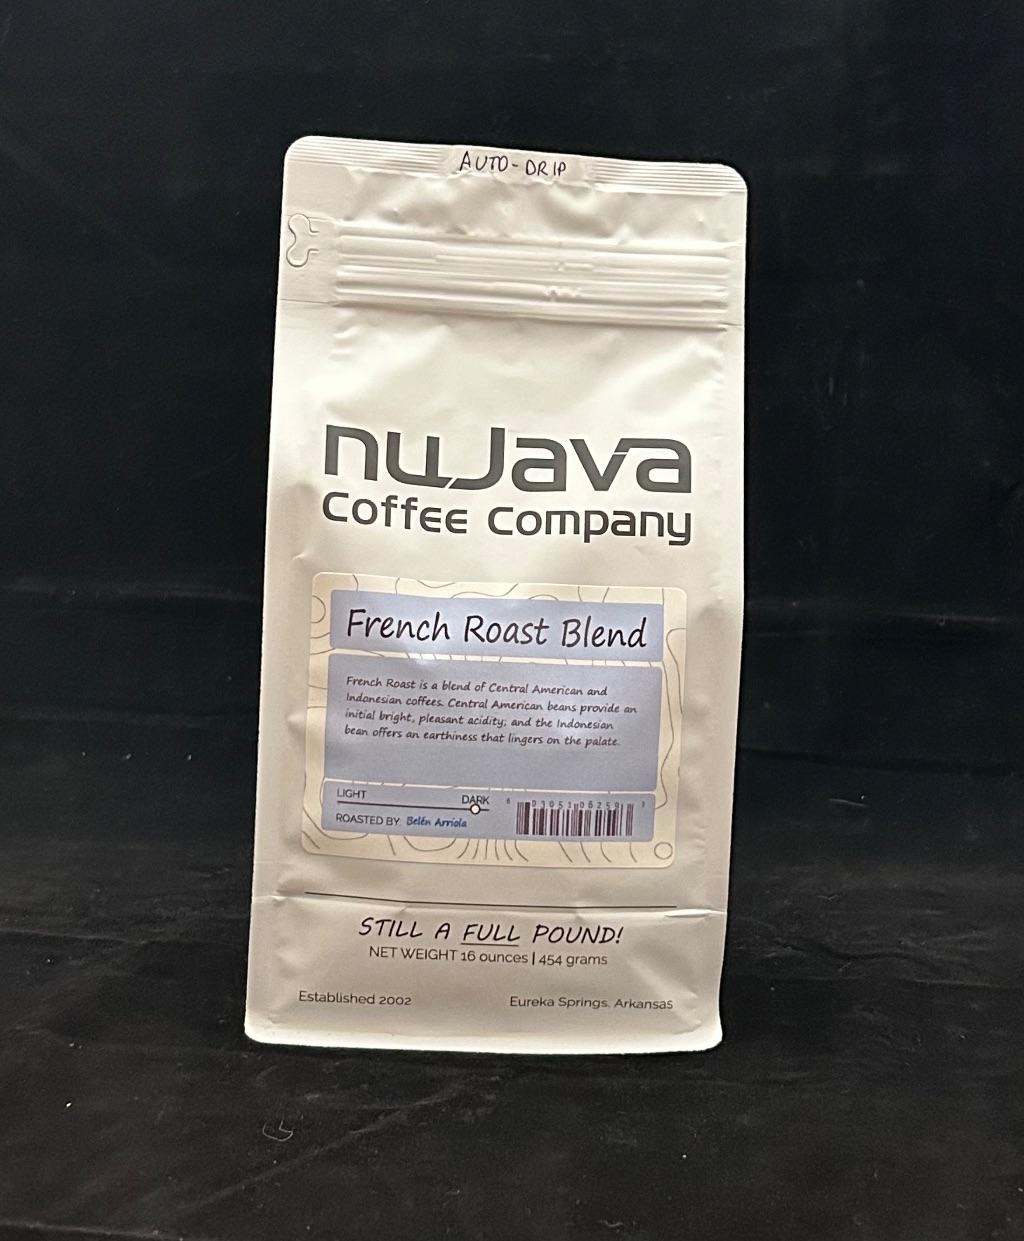 16 oz nuJava Coffee - French Roast Blend